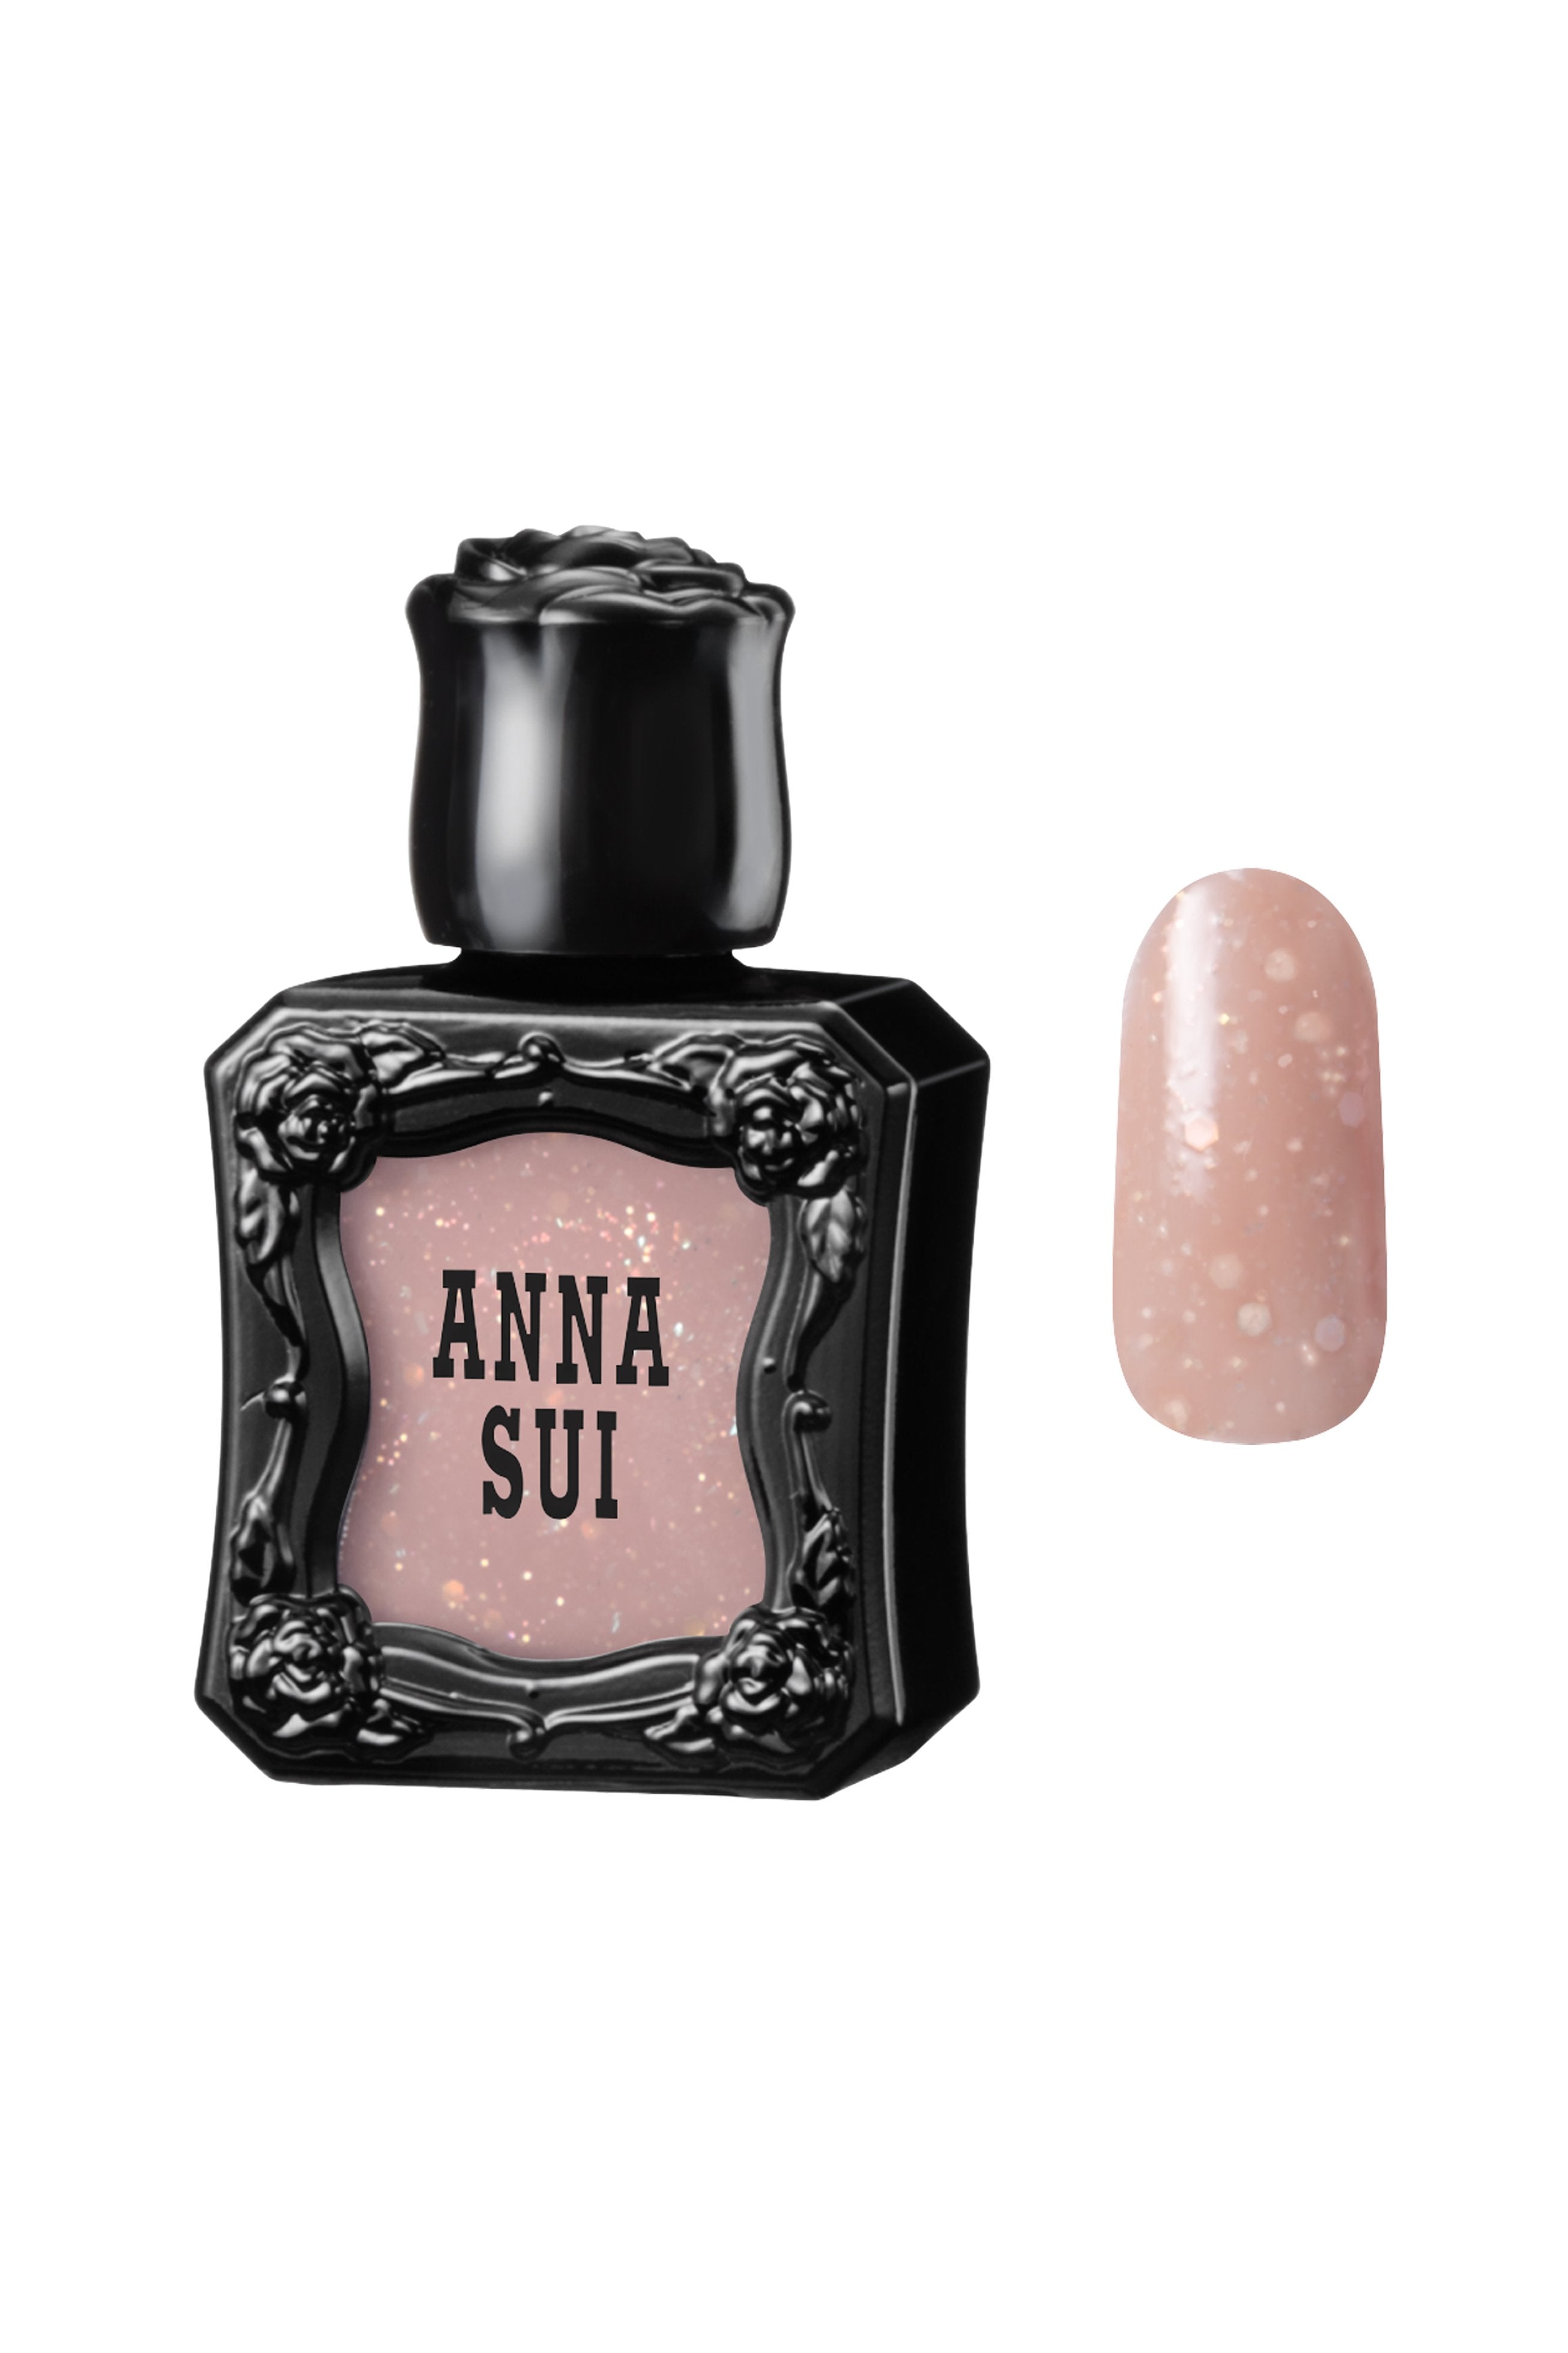 SHINY BEIGE Nail Polish bottles, with raised rose pattern, Anna Sui in black over nail colors in bottle front